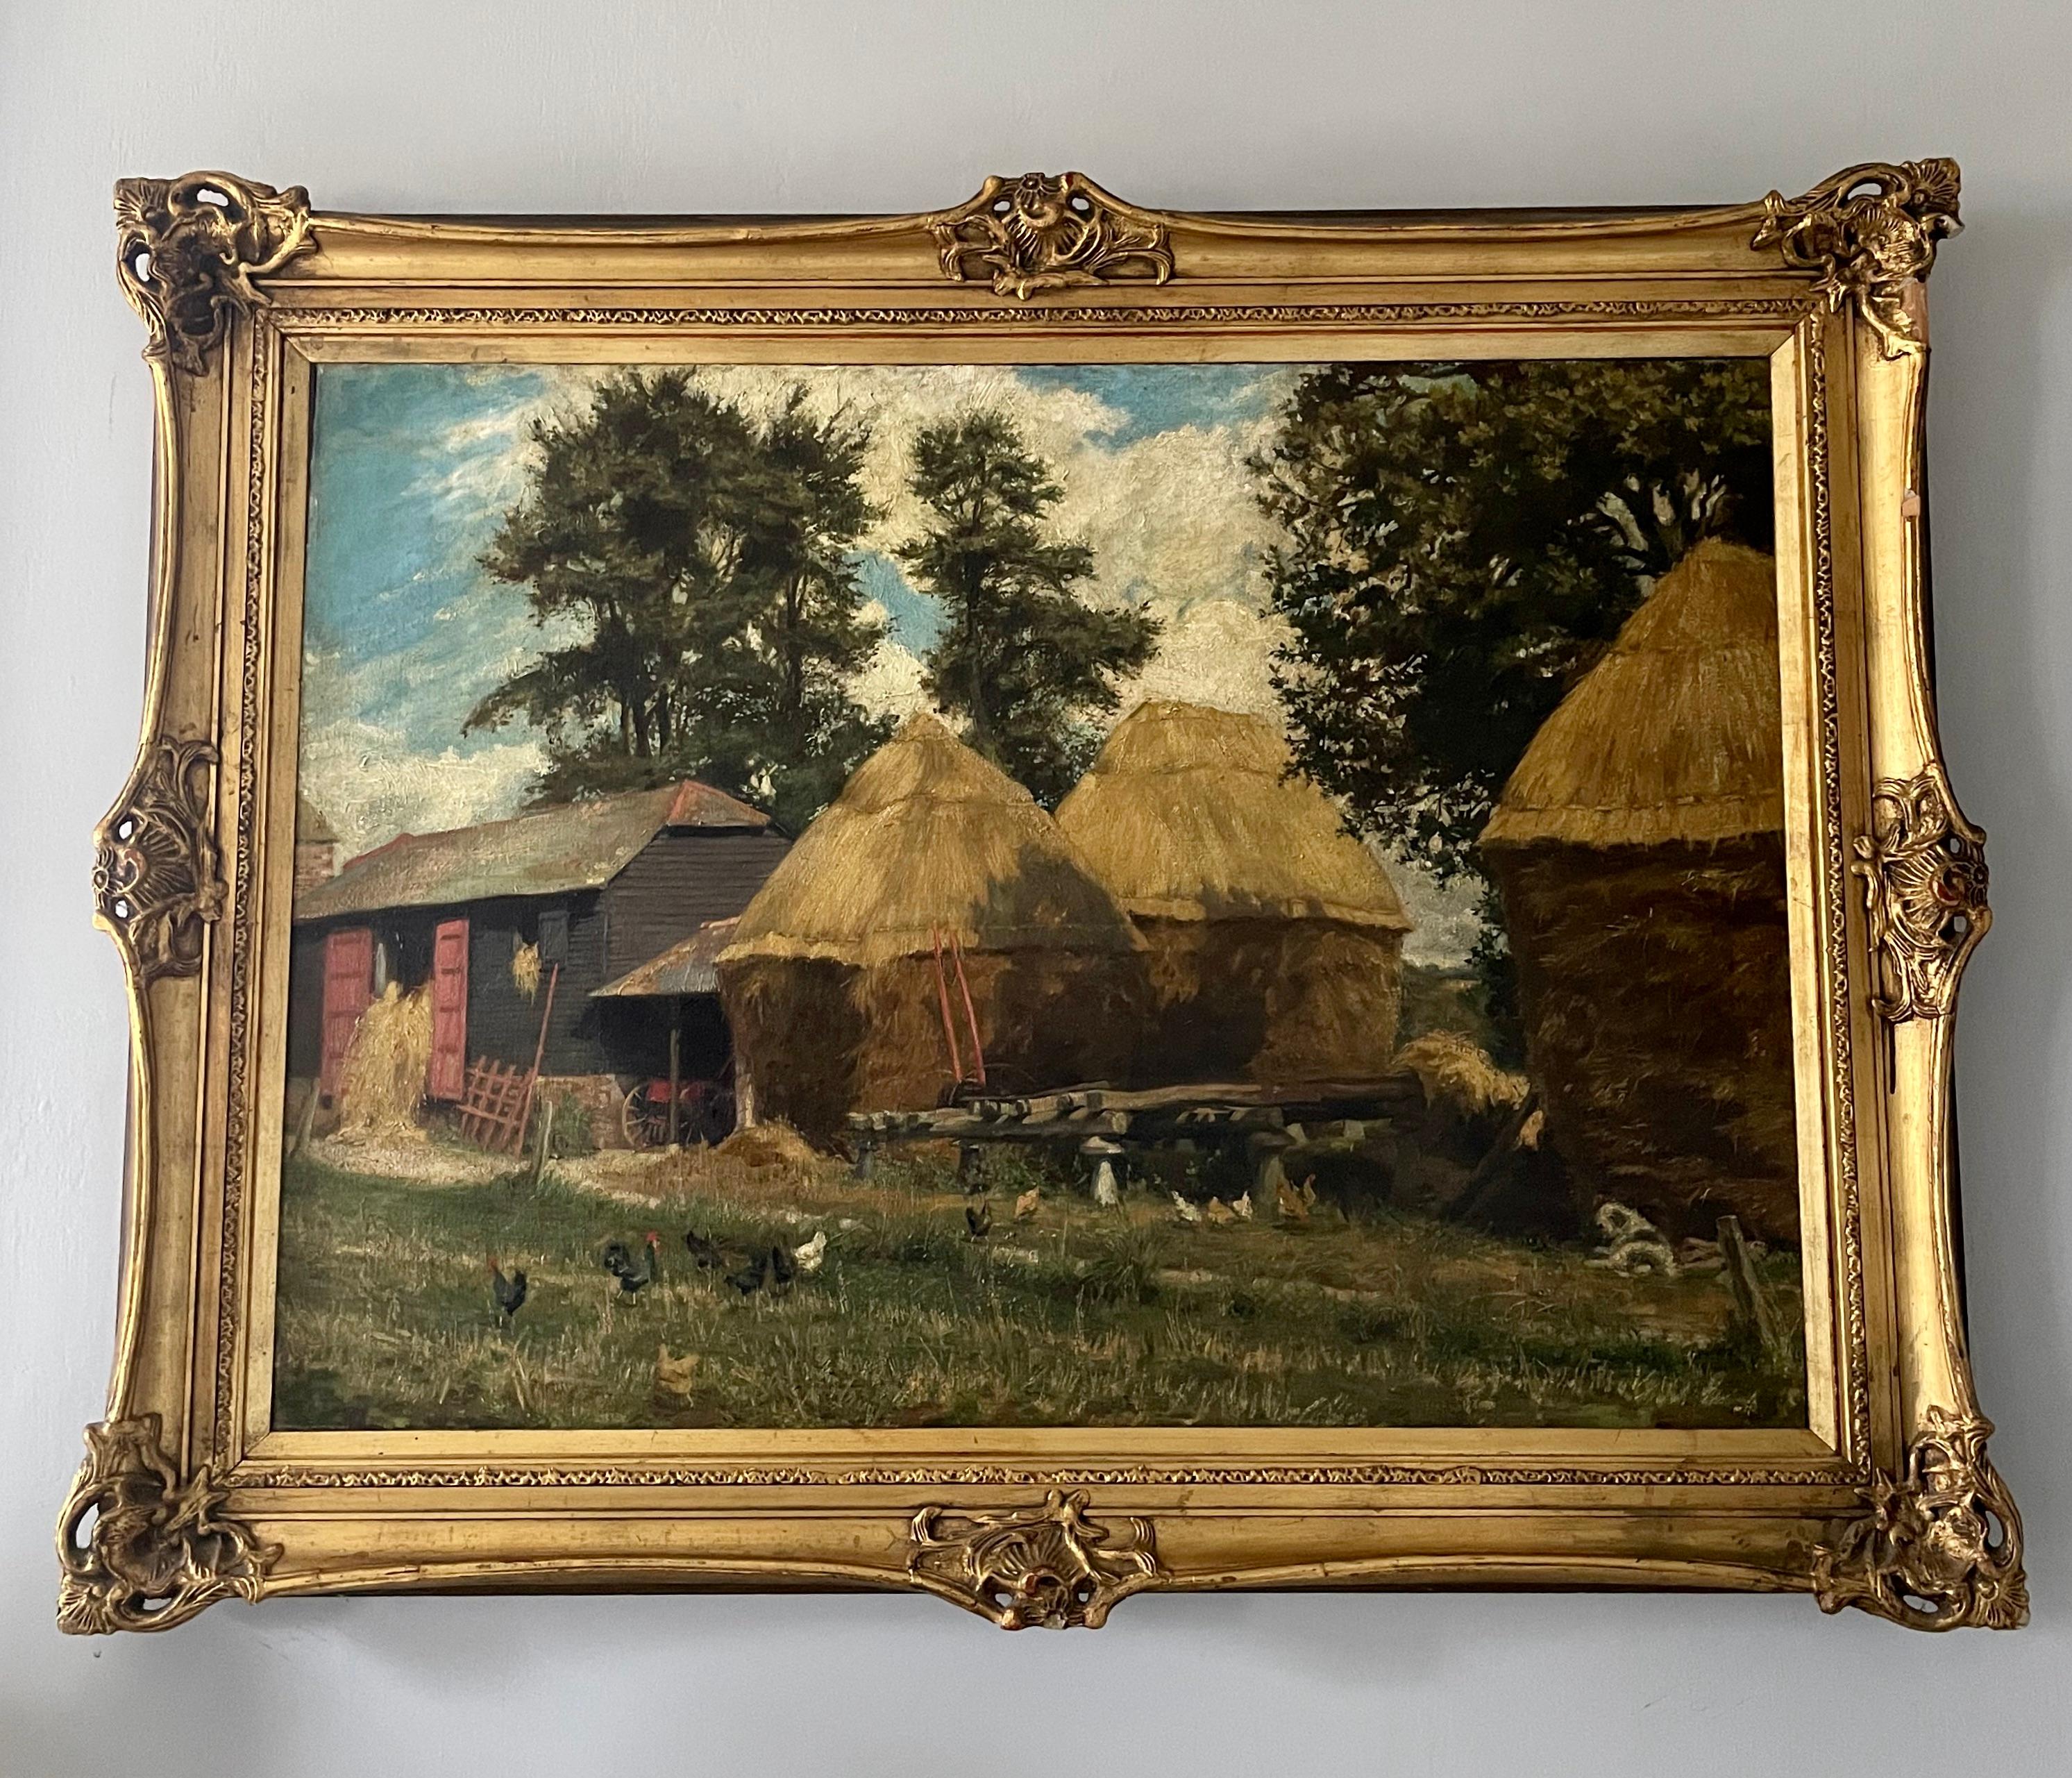 We bought this large and extremely well-executed English barnyard scene many years back because it pictured granaries built on staddlestones. Figuring a picture was worth a thousand words, we've educated thousands on staddlestones and are now